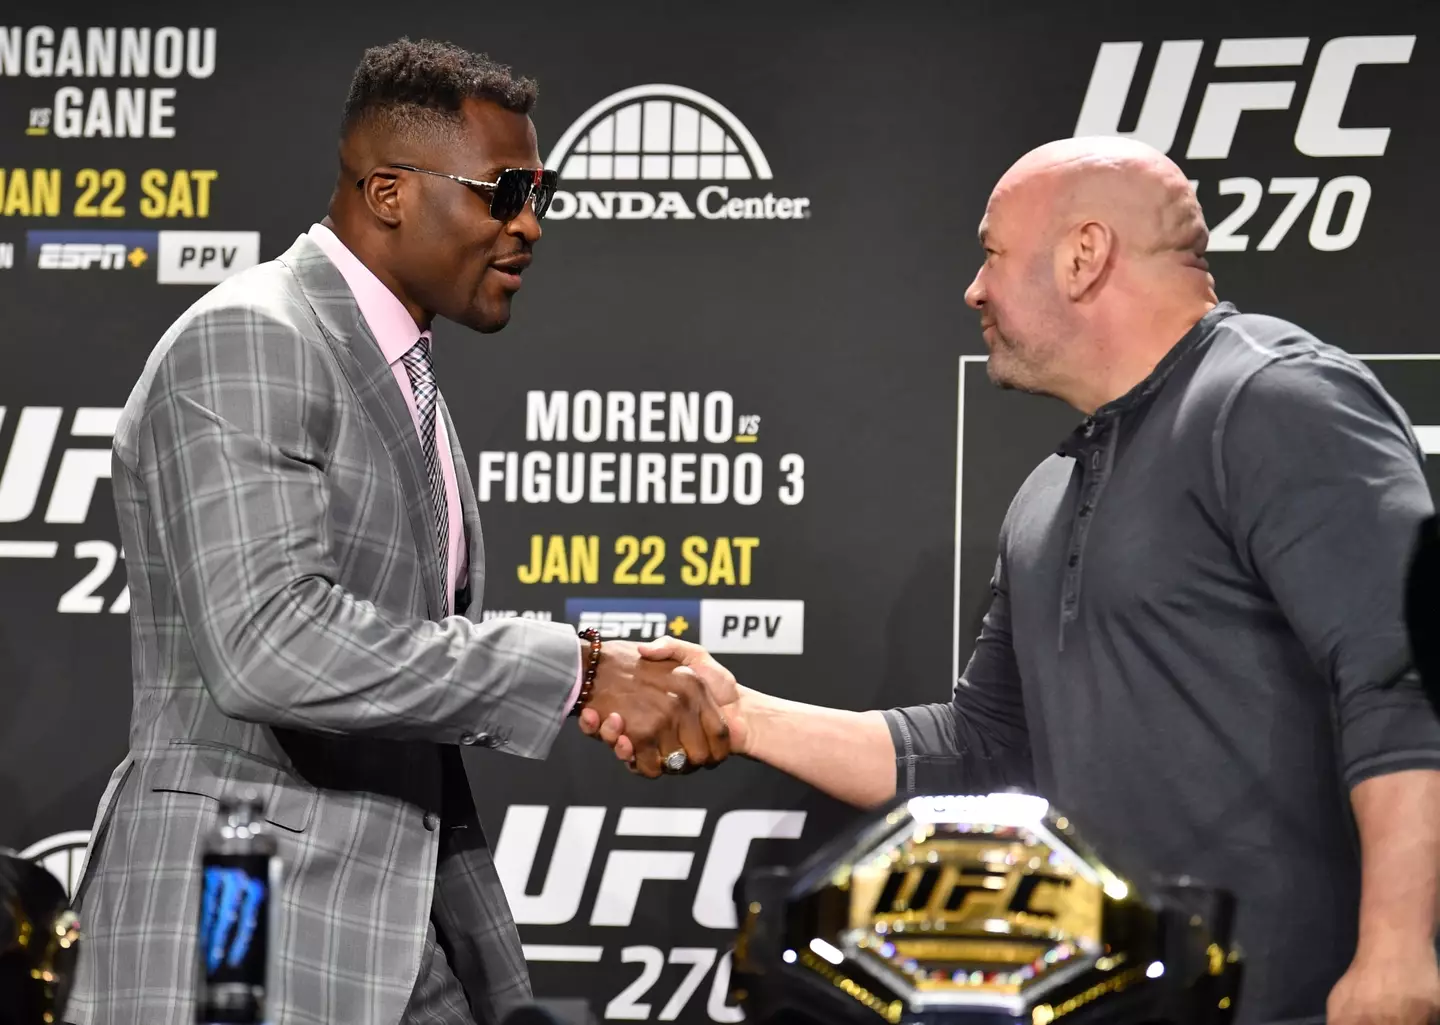 Francis Ngannou and Dana White at UFC 270. Image: Getty